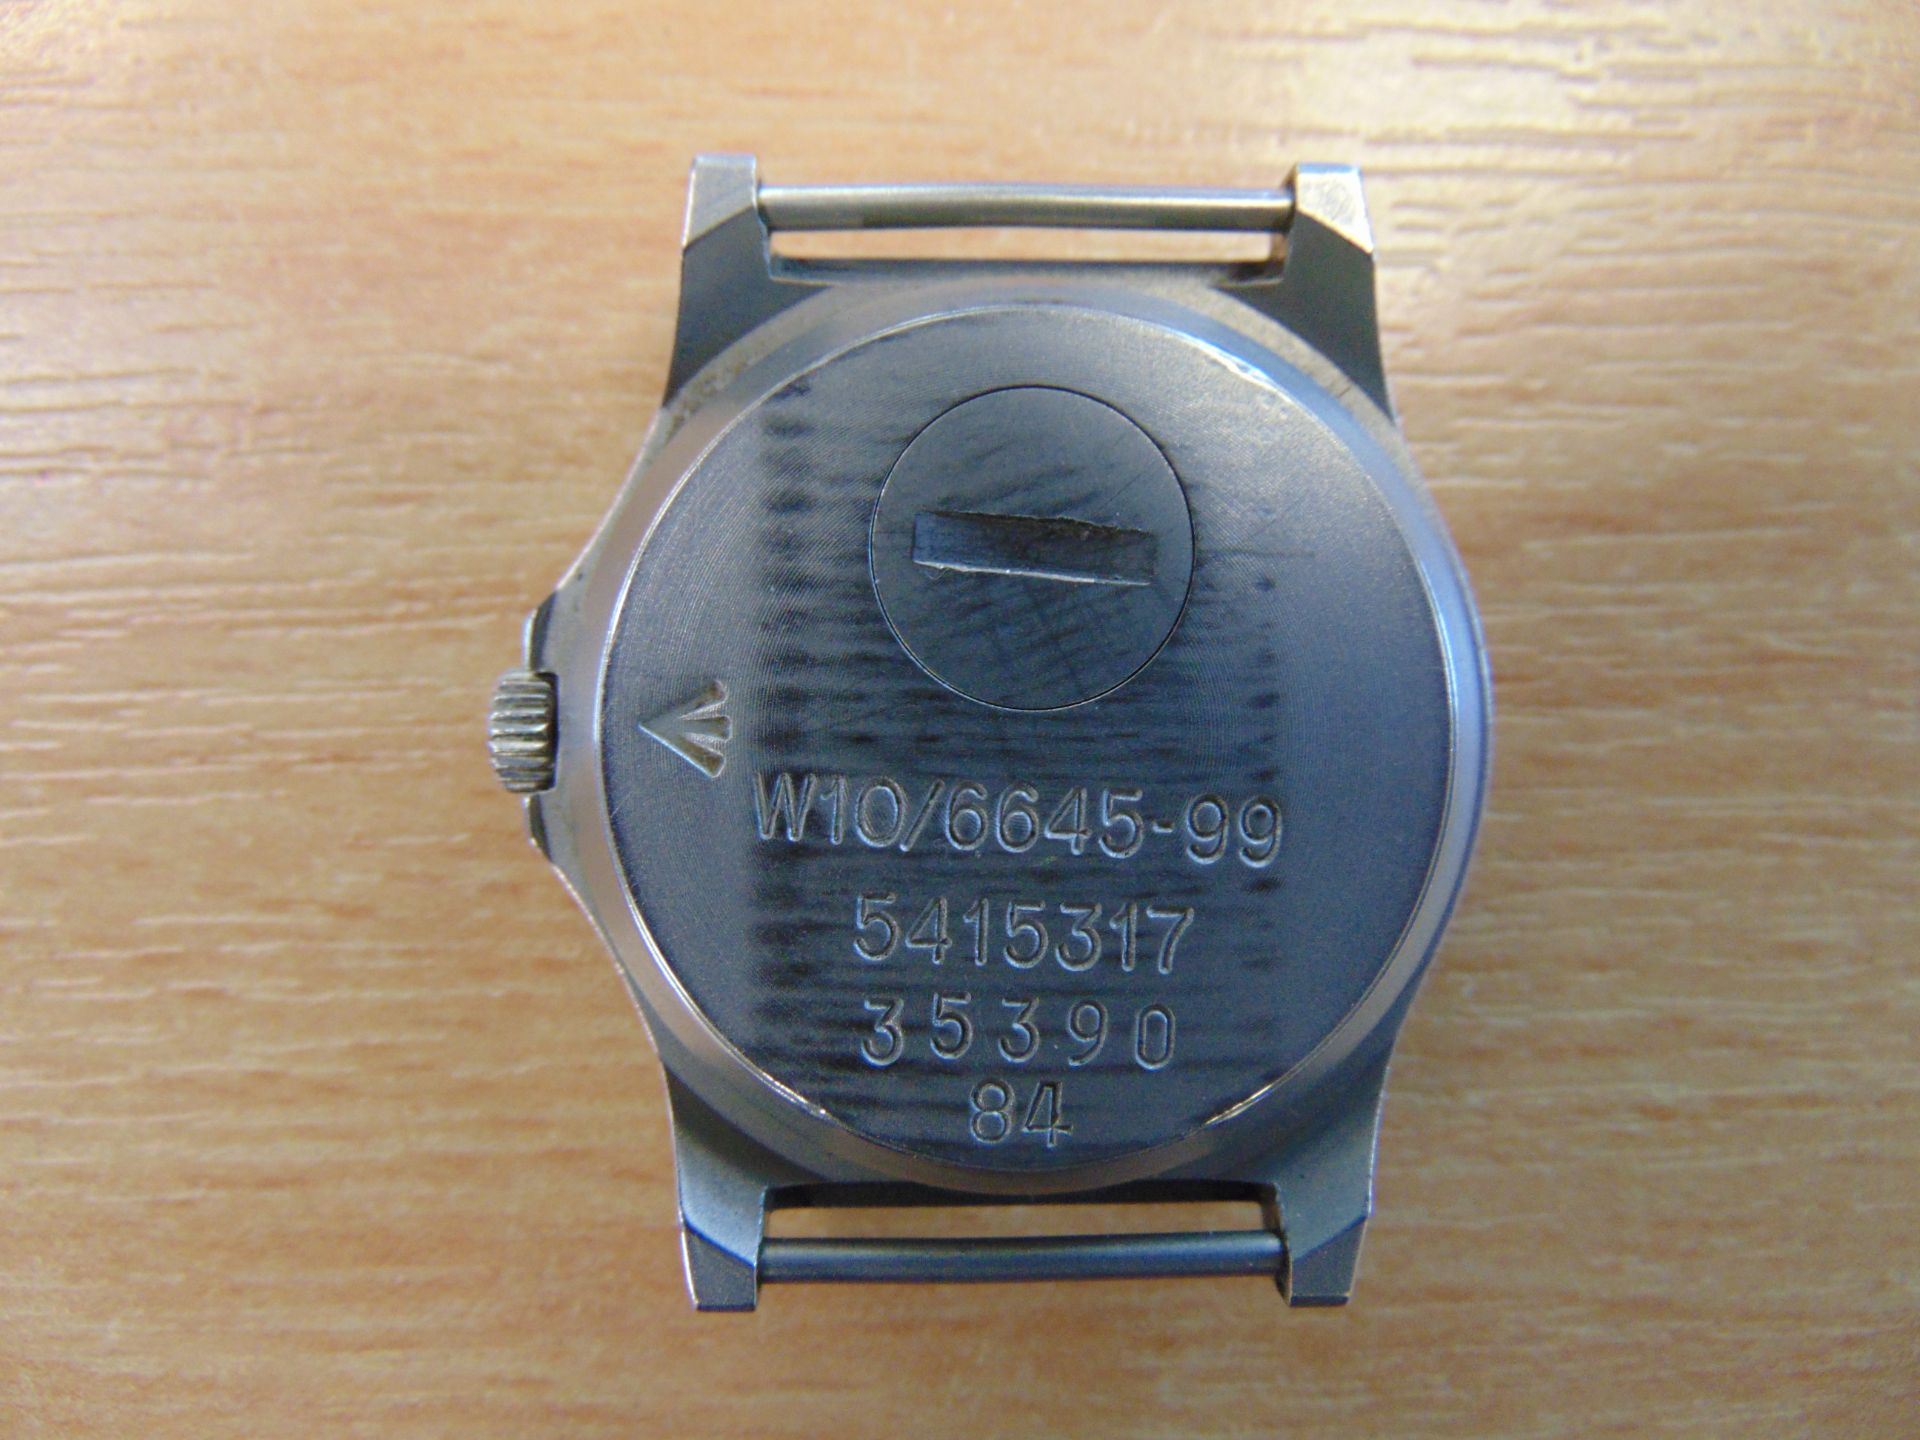 V.Rare CWC W10 Fat Boy Service Watch British Army Issue Nato Marks, Date 1984 - Image 4 of 6